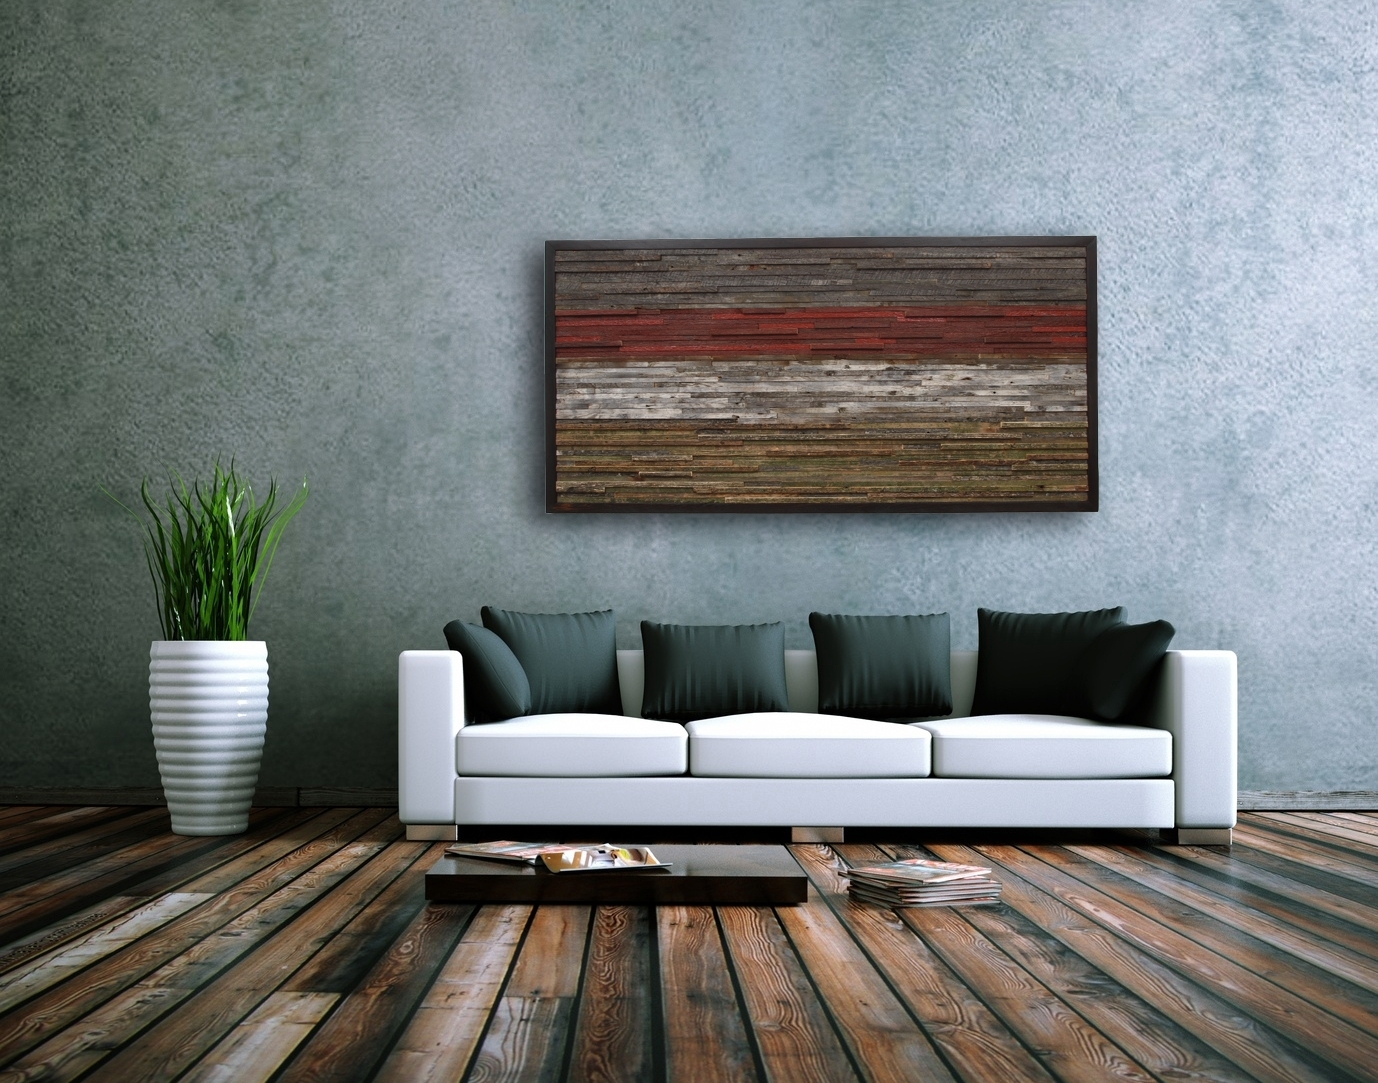  beautifully balances rustic with contemporary. [by Maker Craig Forget